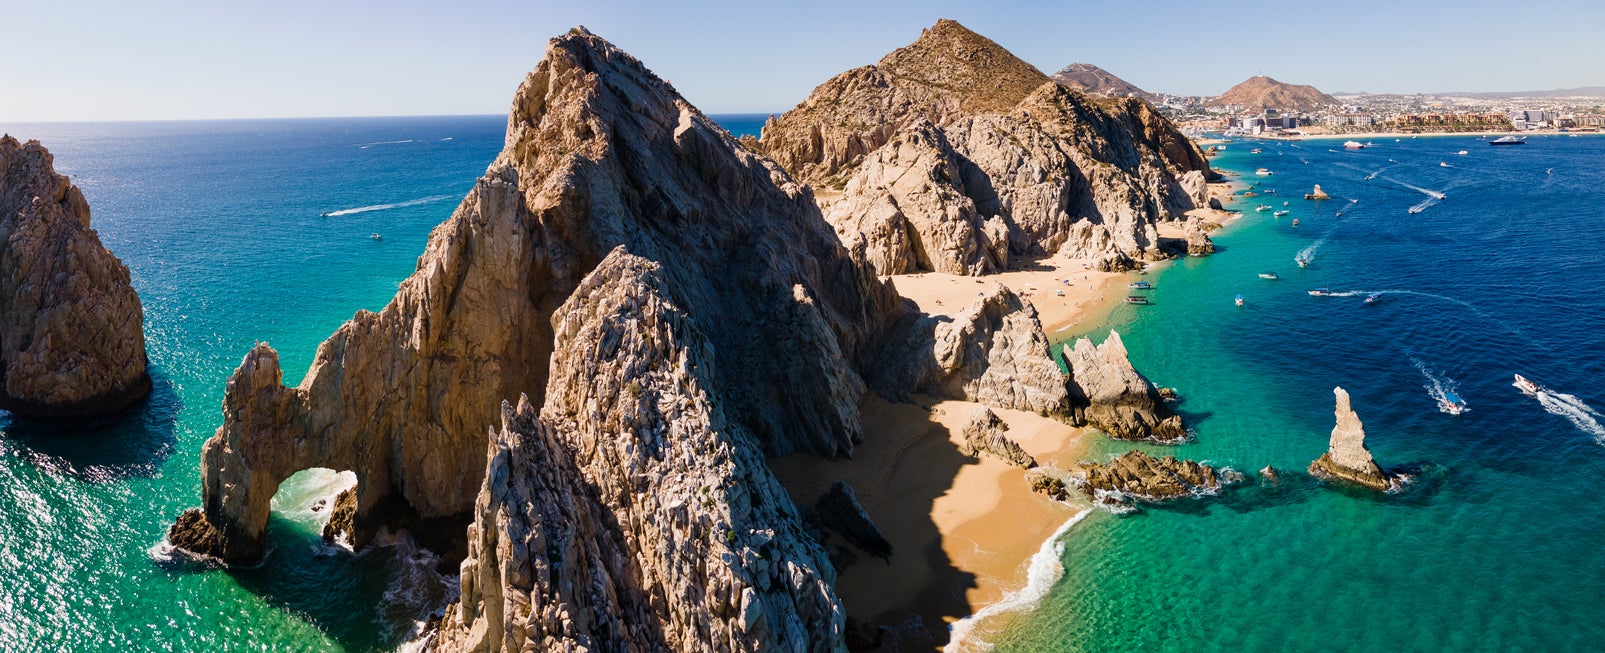 Los Cabos is home to some of the most dramatic coastline in Mexico